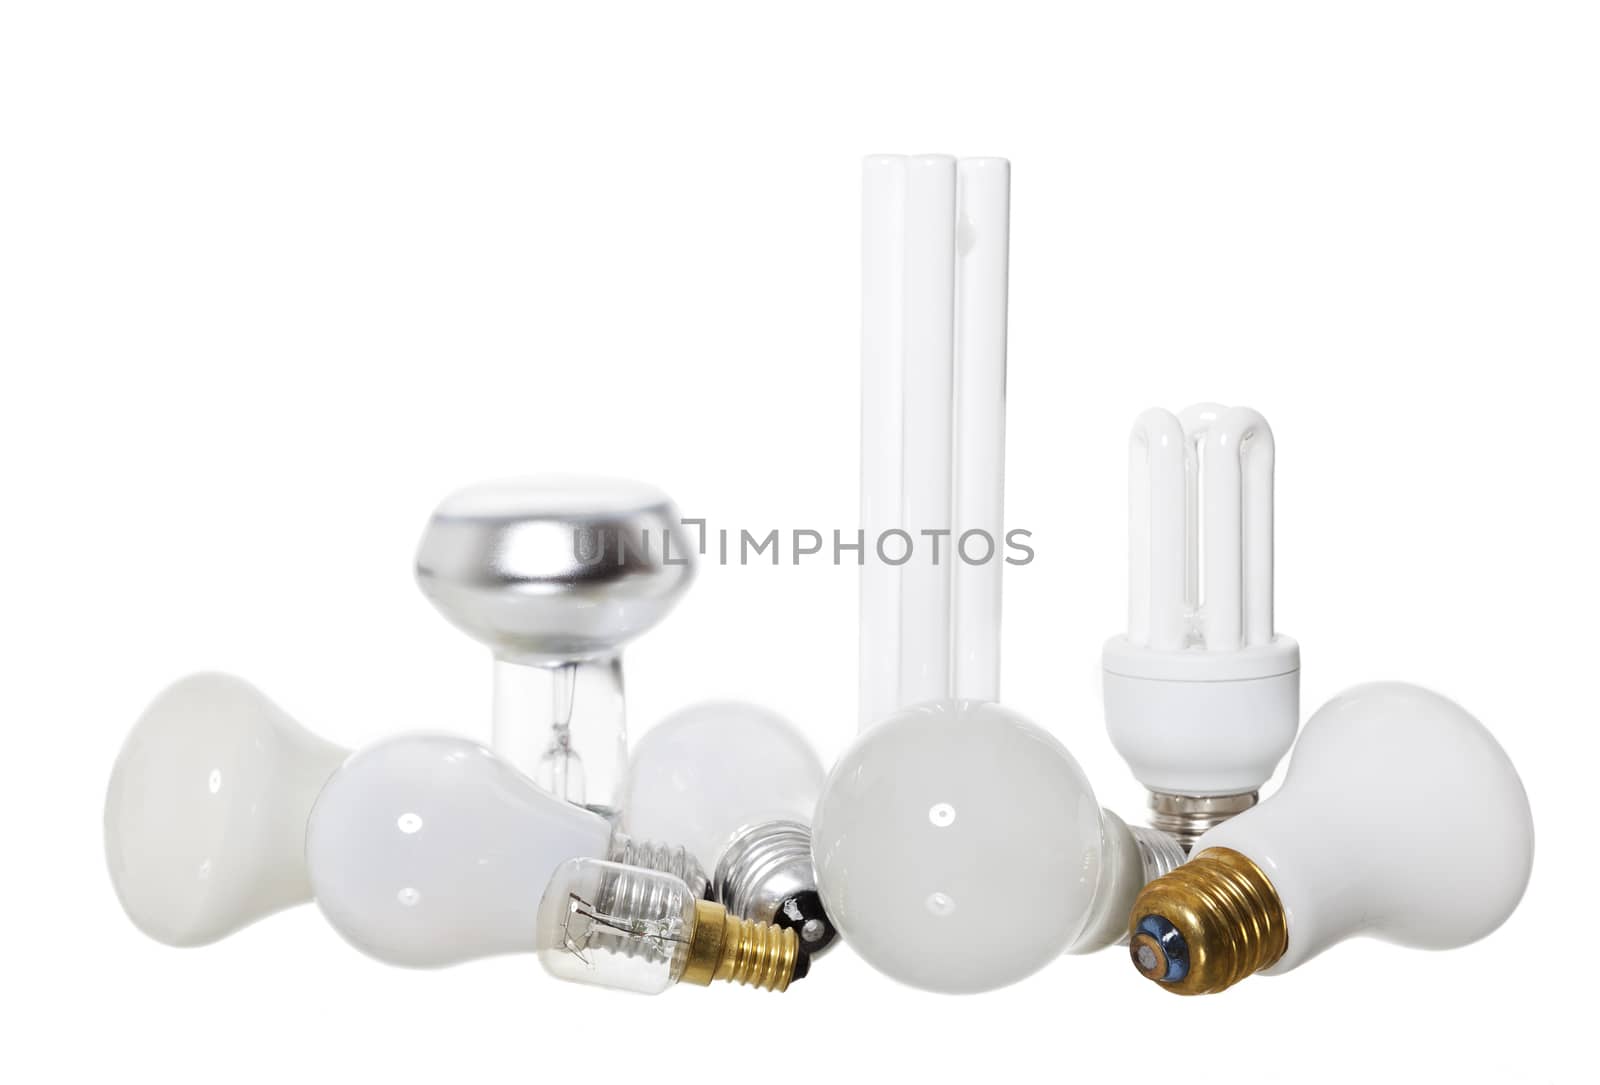 Group of Lights Bulbs isolated on white background